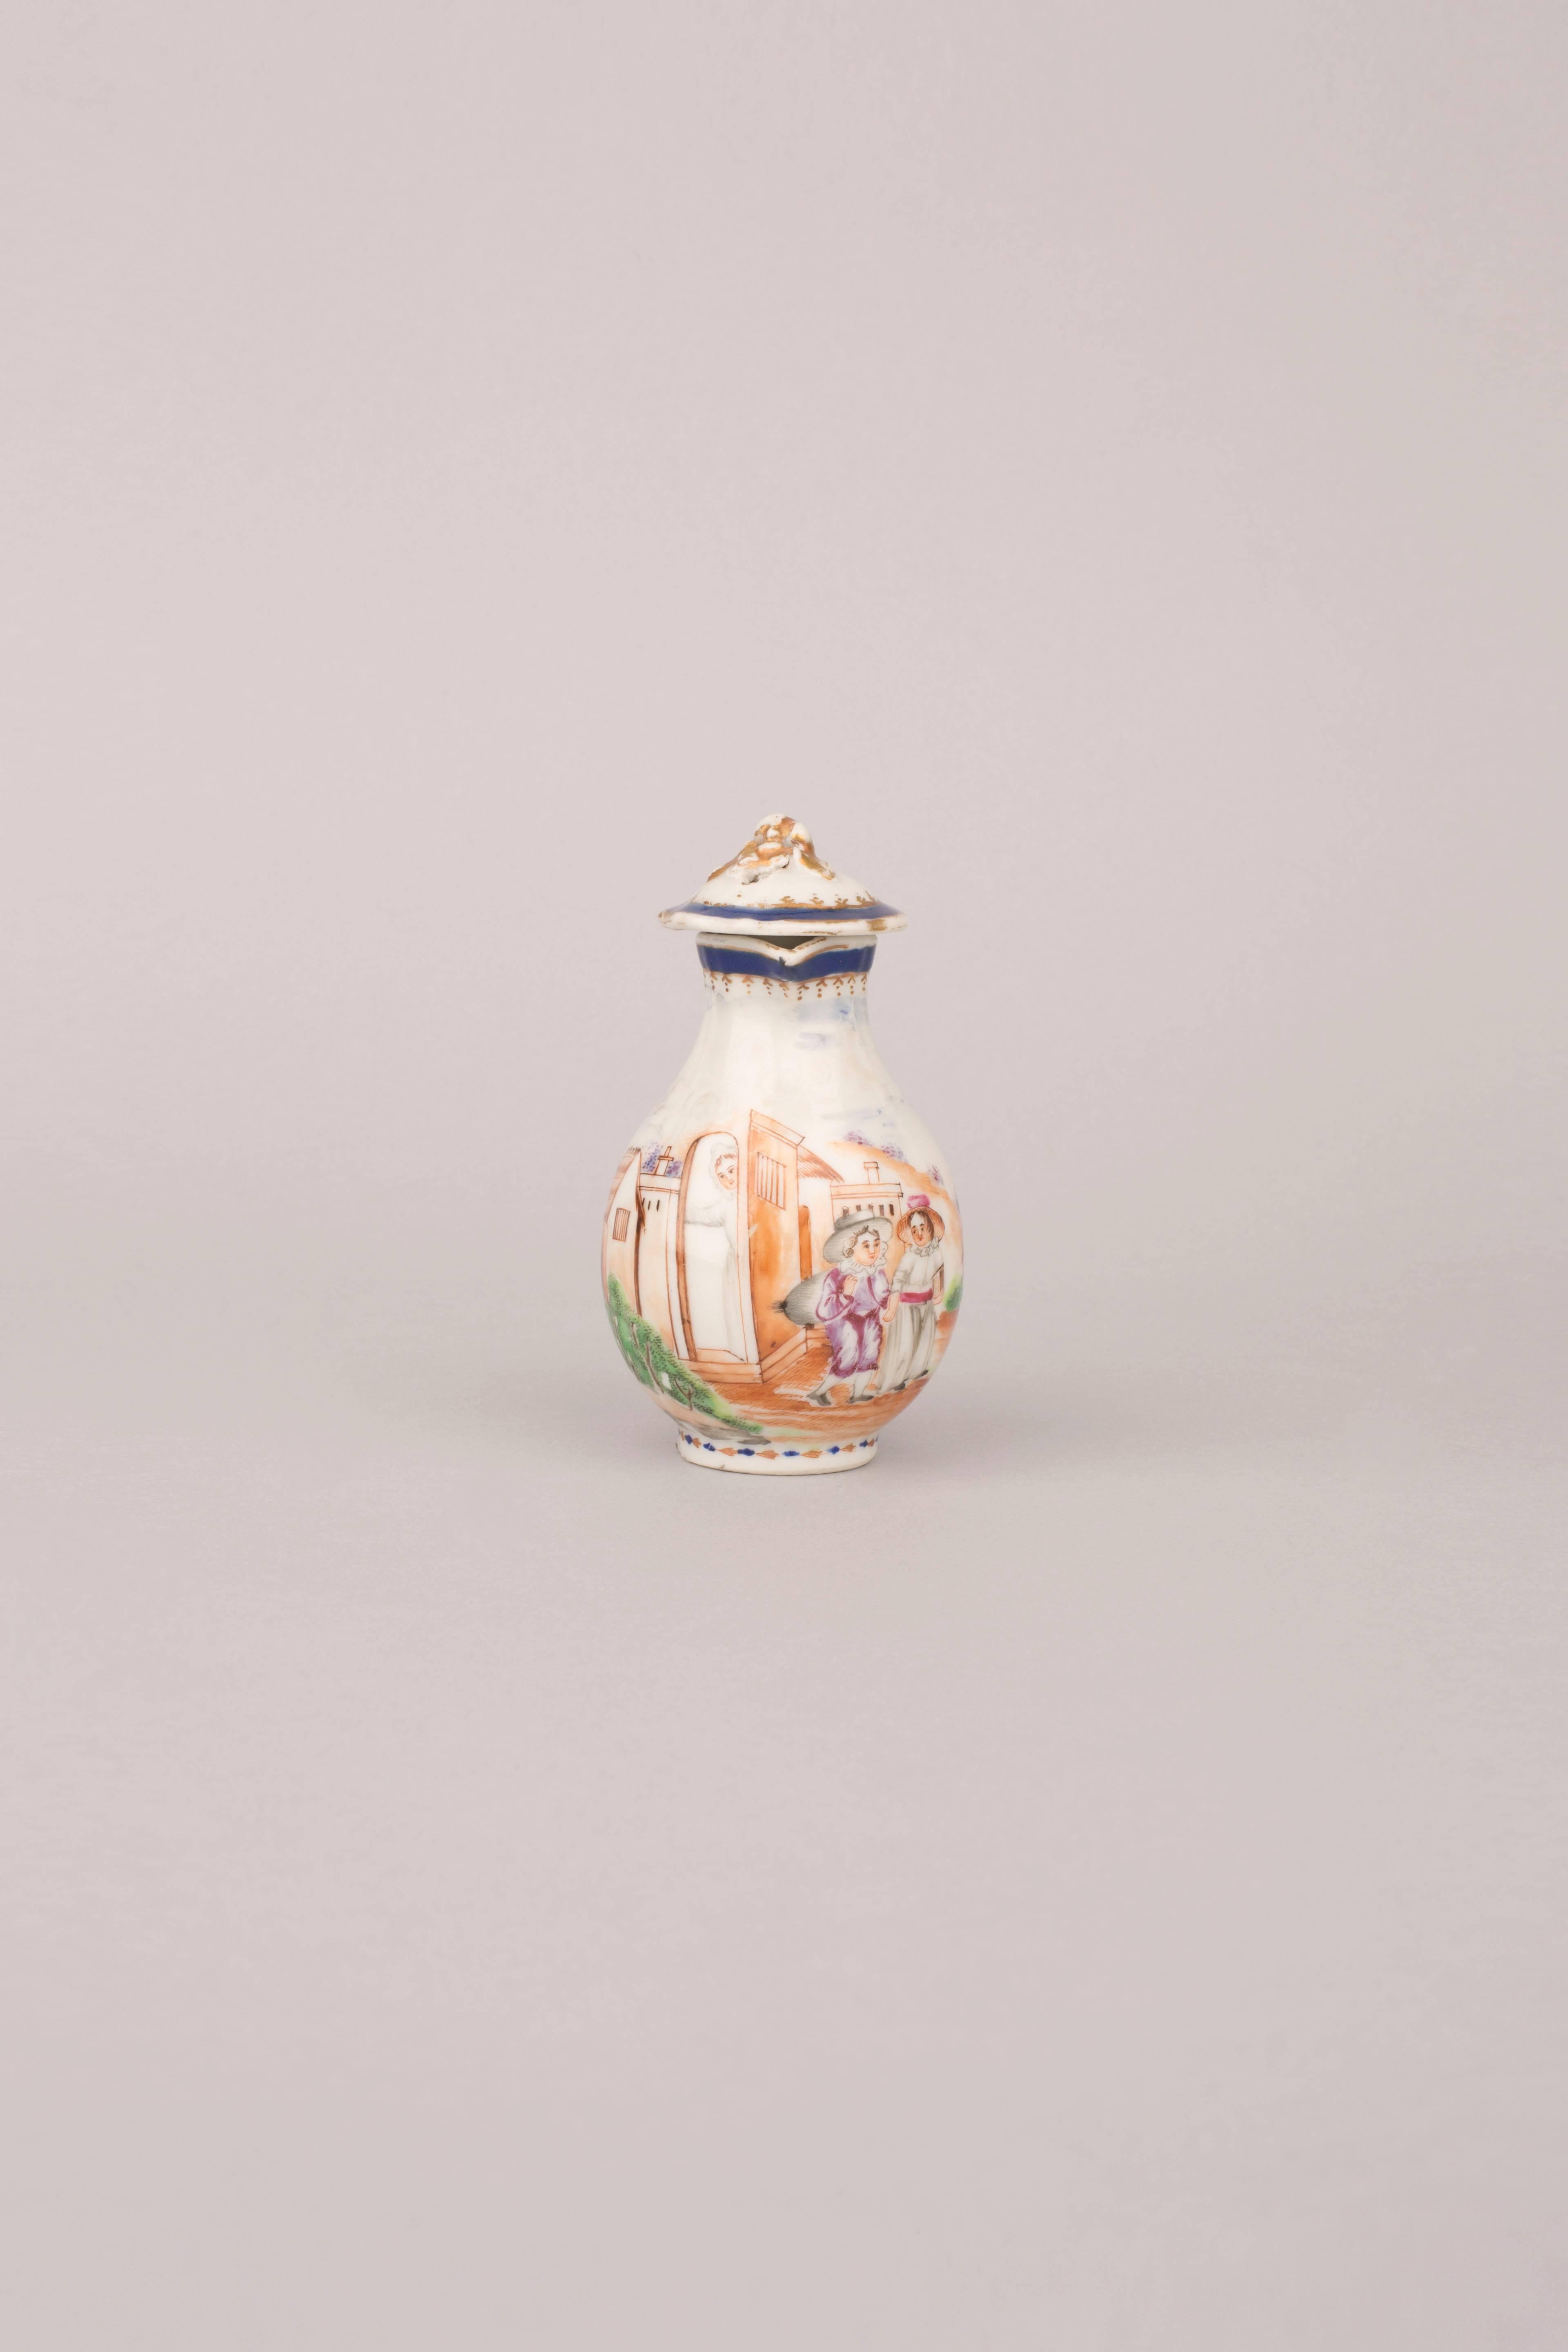 A Chinese export porcelain famille rose cream jug and cover painted with a scene of two children leaving school, as the teacher looks on from a doorway,

Qianlong, circa 1790. 

9.9 cm high including cover, 3cm mouth diameter.